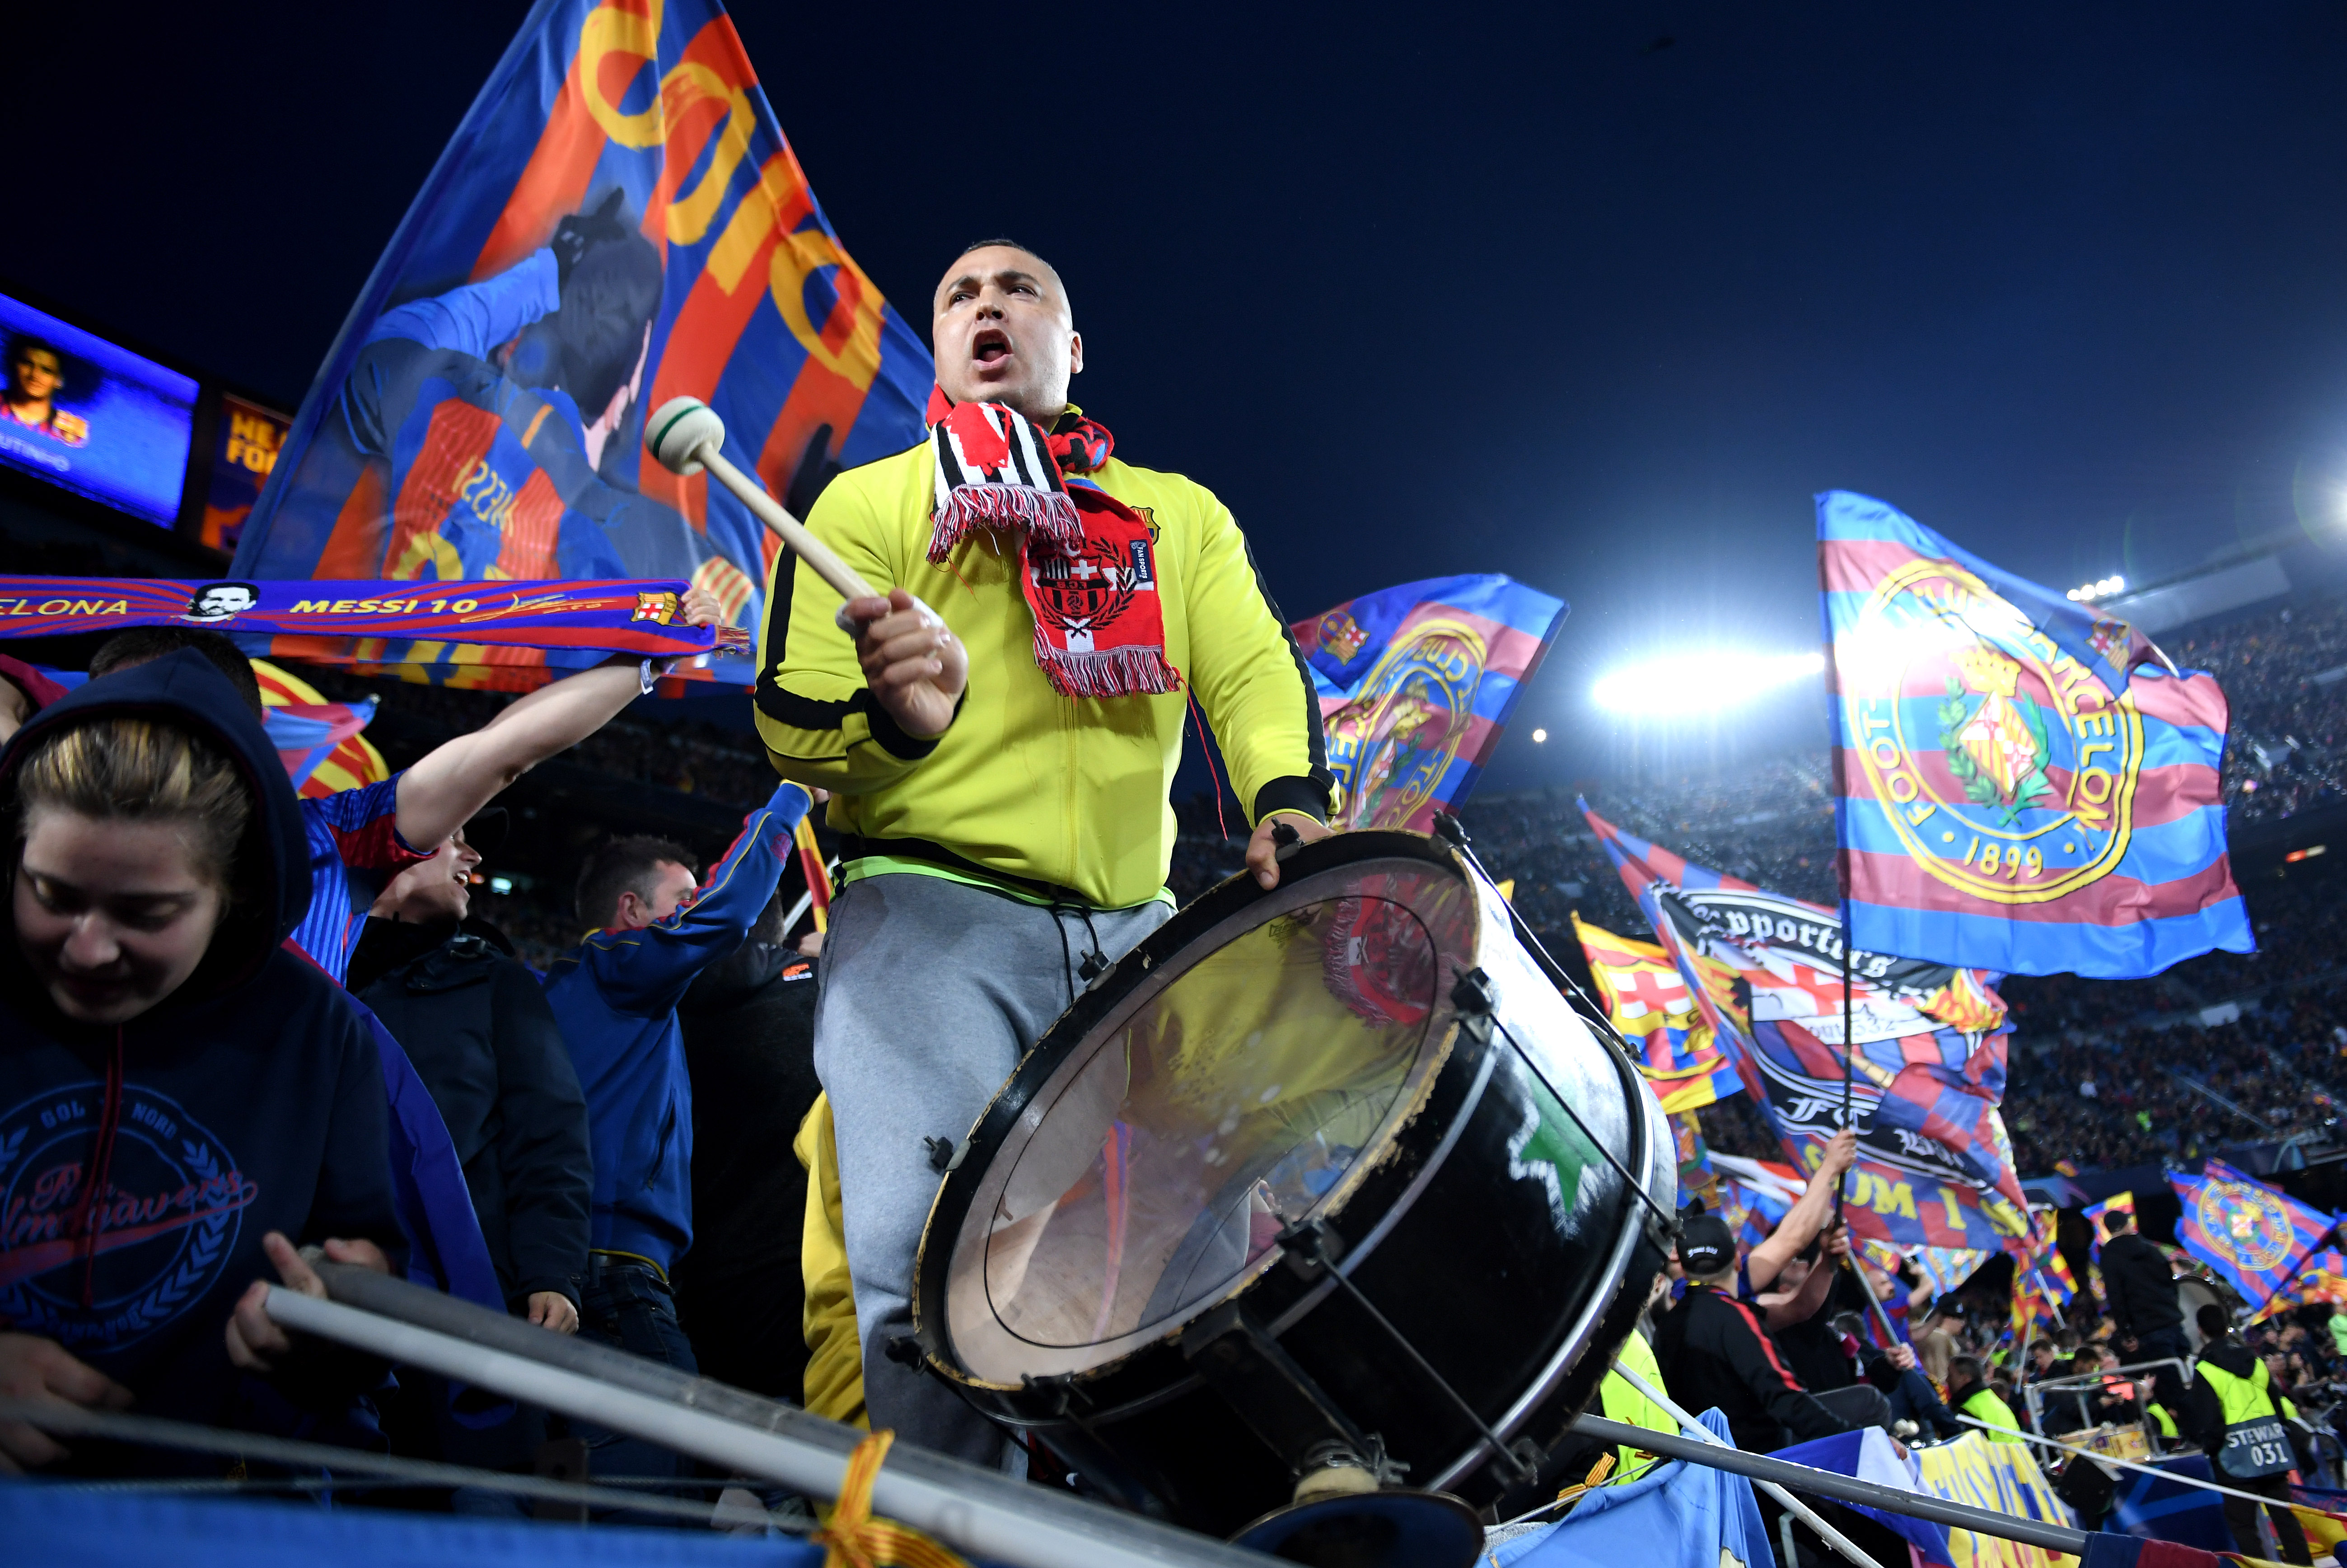 BARCELONA, SPAIN - APRIL 16:   Barcelona fans show their support during the UEFA Champions League Quarter Final second leg match between FC Barcelona and Manchester United at Camp Nou on April 16, 2019 in Barcelona, Spain. (Photo by Matthias Hangst/Getty Images)